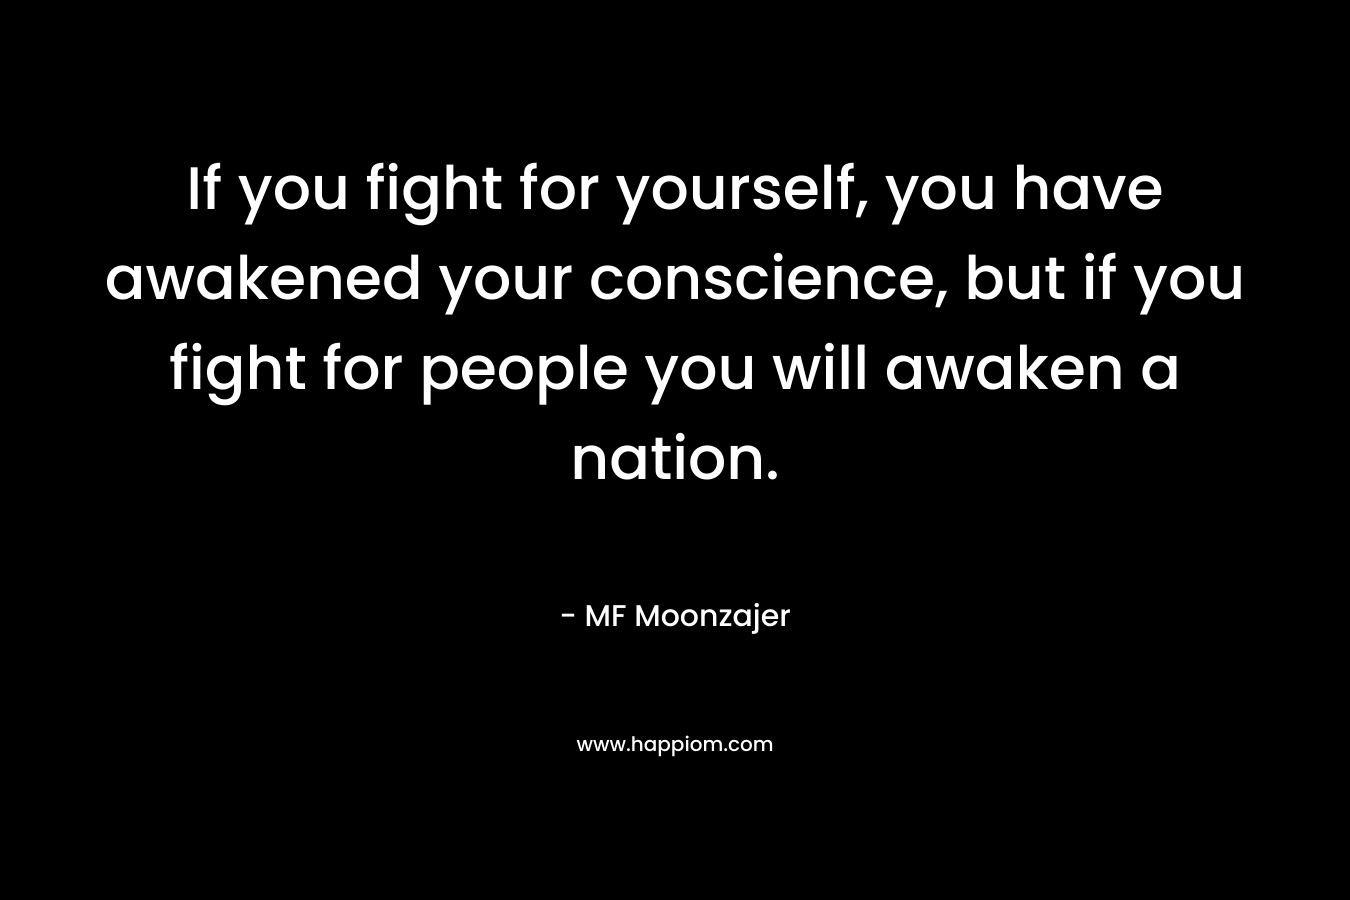 If you fight for yourself, you have awakened your conscience, but if you fight for people you will awaken a nation. – MF Moonzajer